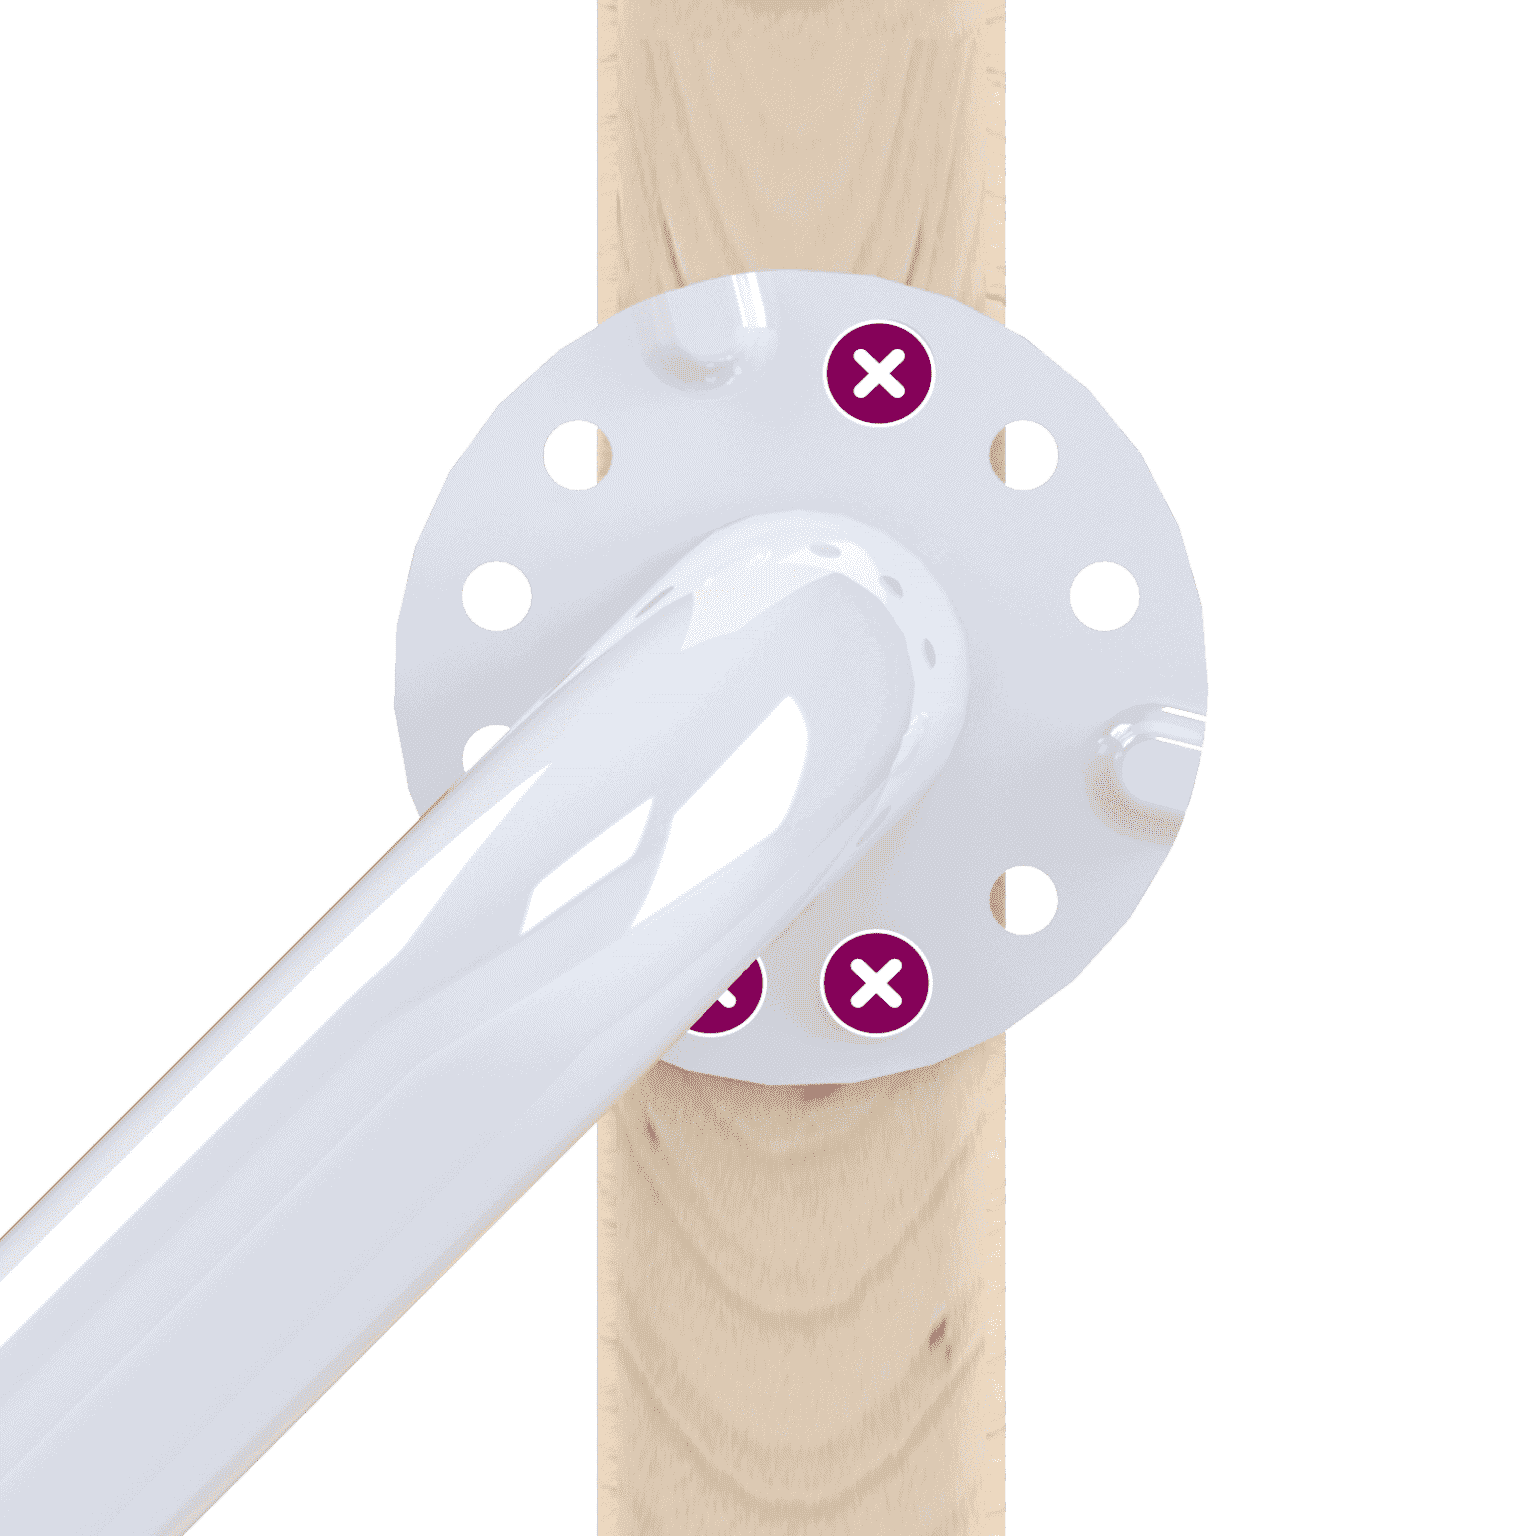 Illustration of the Easy Mount Grab Bar showing how the 9 hole flange helps make installation easier